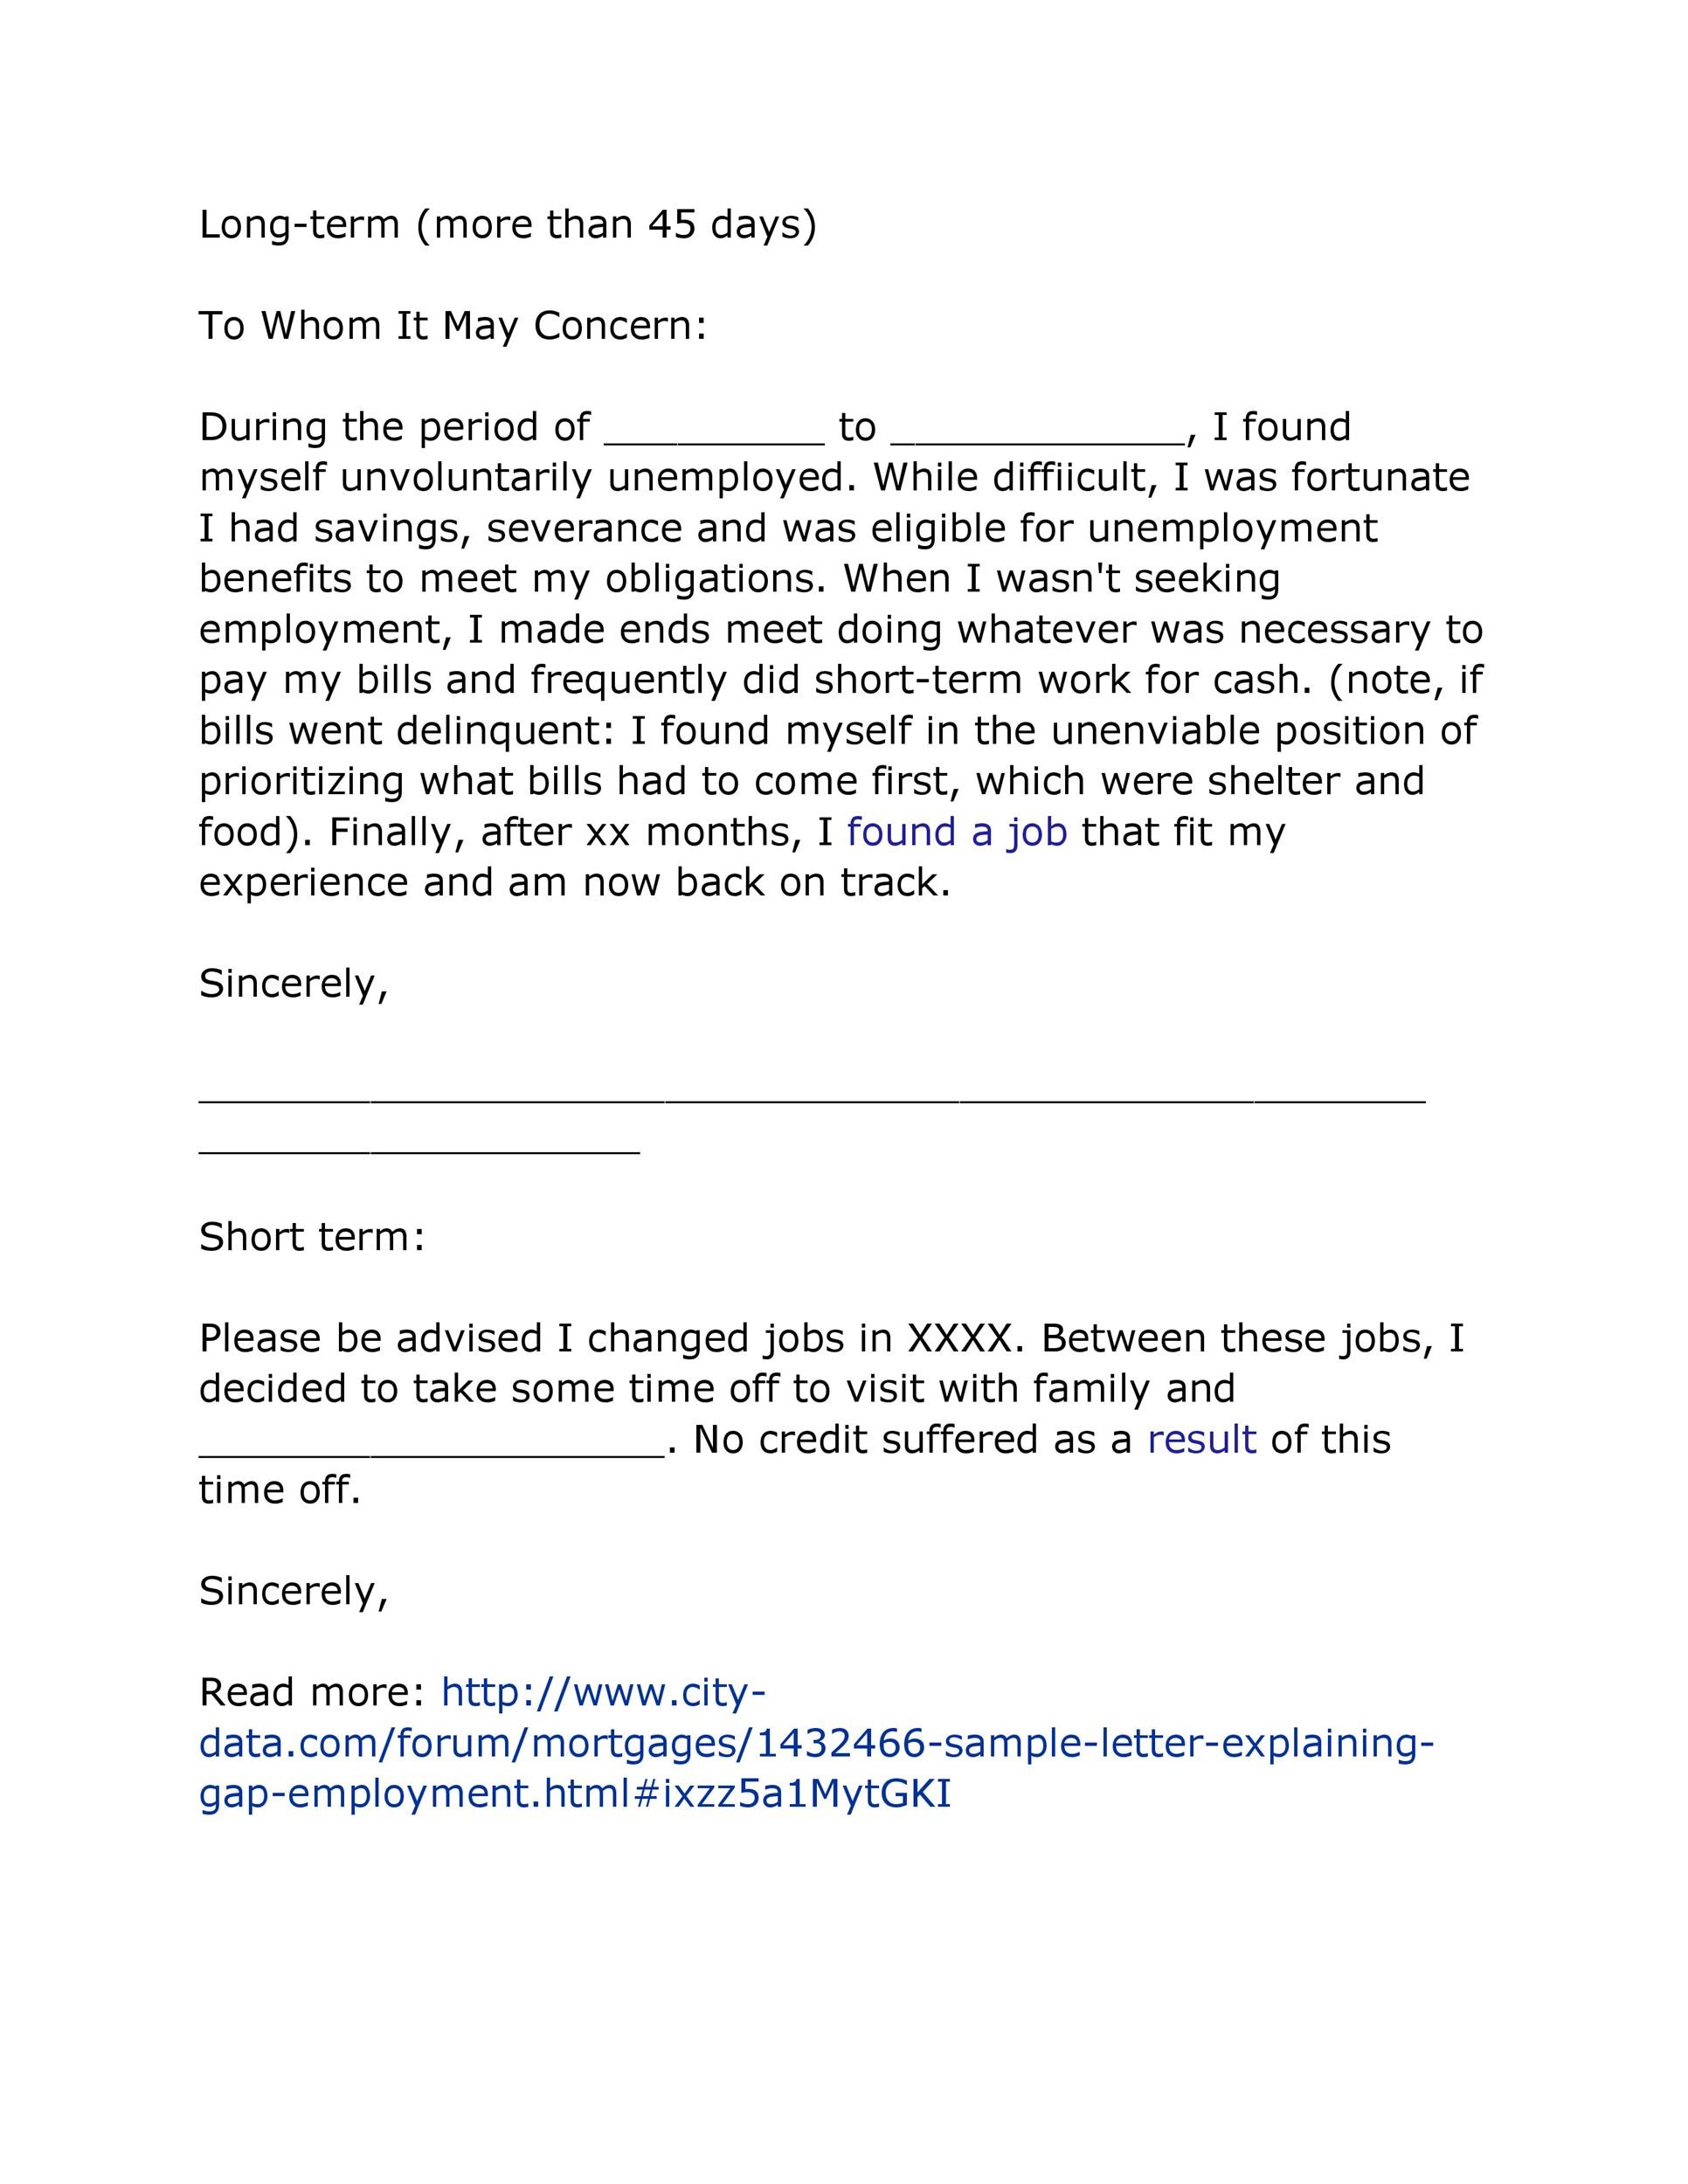 Sample Letter Of Explanation For Derogatory Credit For Mortgage from templatelab.com